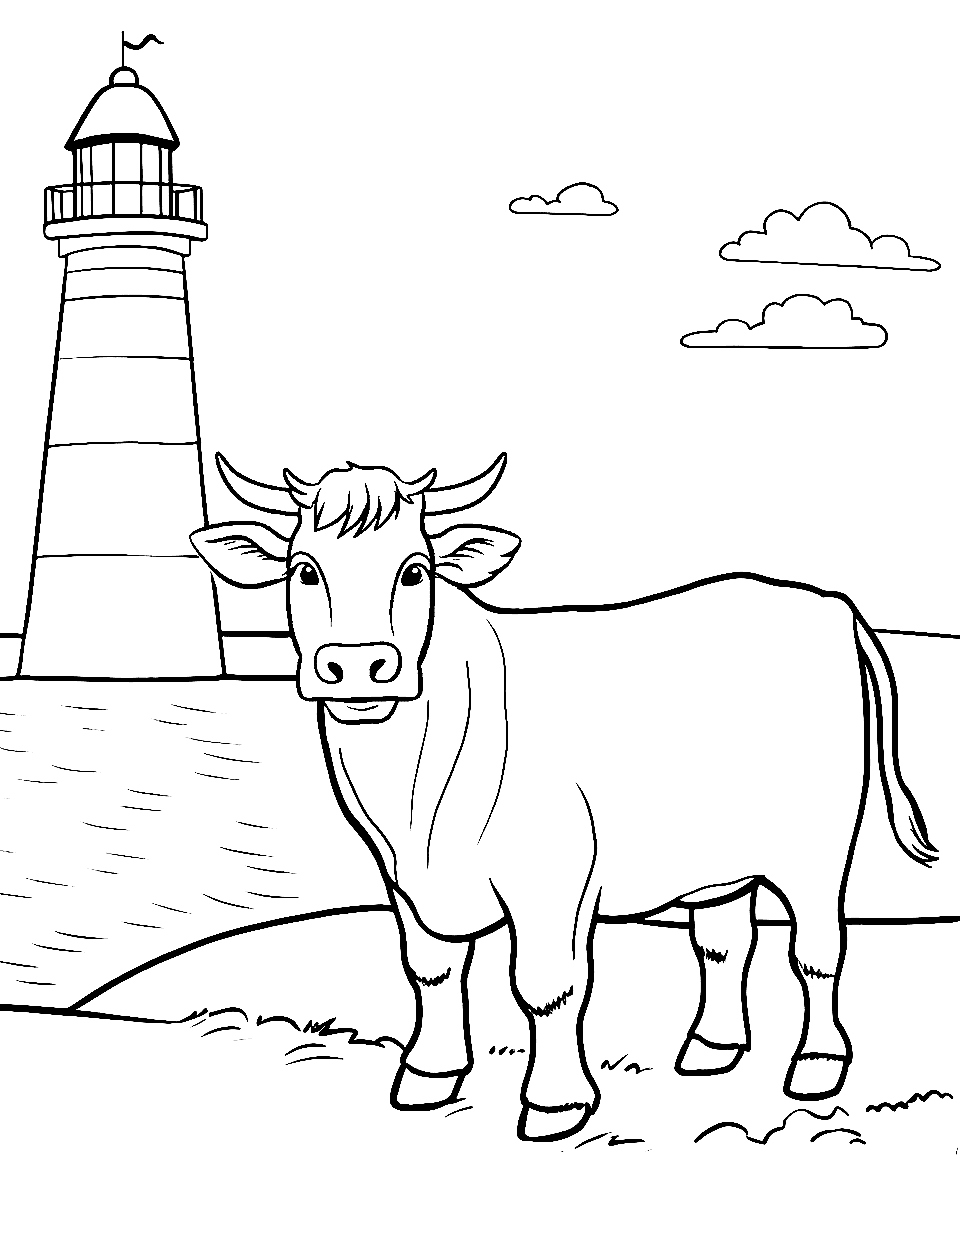 Lighthouse and Coastal Cow Coloring Page - A cow grazing near a simplistic lighthouse along the coast.